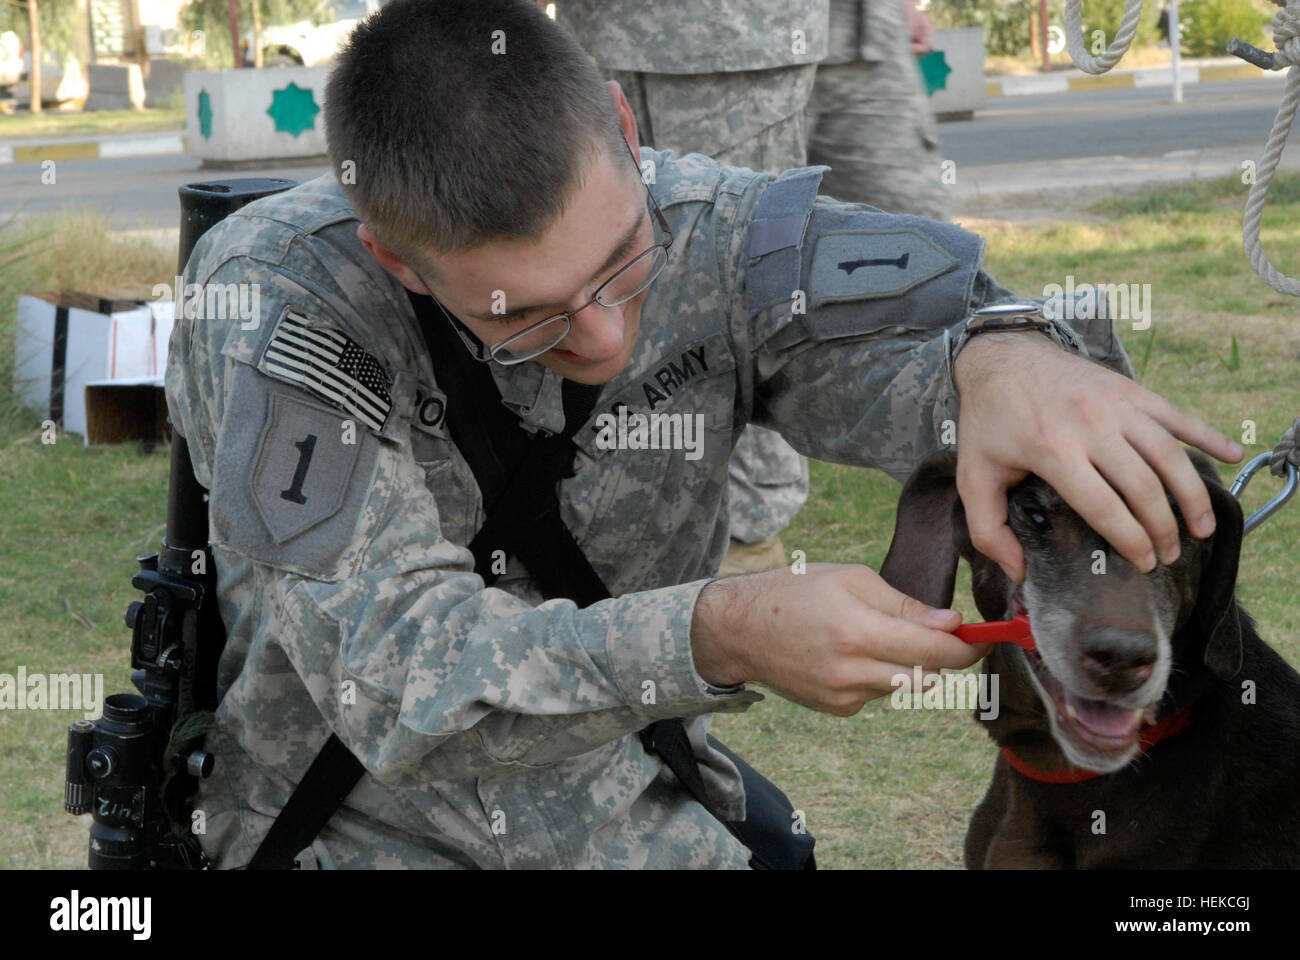 BAGHDAD—Spc. Ruben Pop, a medic with Company C, Special Troops Battalion, 2nd Advise and Assist Brigade, 1st Infantry Division, United States Division – Center and a Houston native, brushes the teeth of Timer, a working dog with the 11th Iraqi Army Division. Joey and three other working dogs were inherited by the 11th IA Div. from a contracting firm and are now being re-trained by Dagger Brigade Soldiers to work with 11th IA Div. handlers to detect explosive devices. (U.S. Army photo by Sgt. Daniel Stoutamire, 2nd AAB, 1st Inf. Div., USD-C) Flickr - The U.S. Army - Proper Hygiene Stock Photo